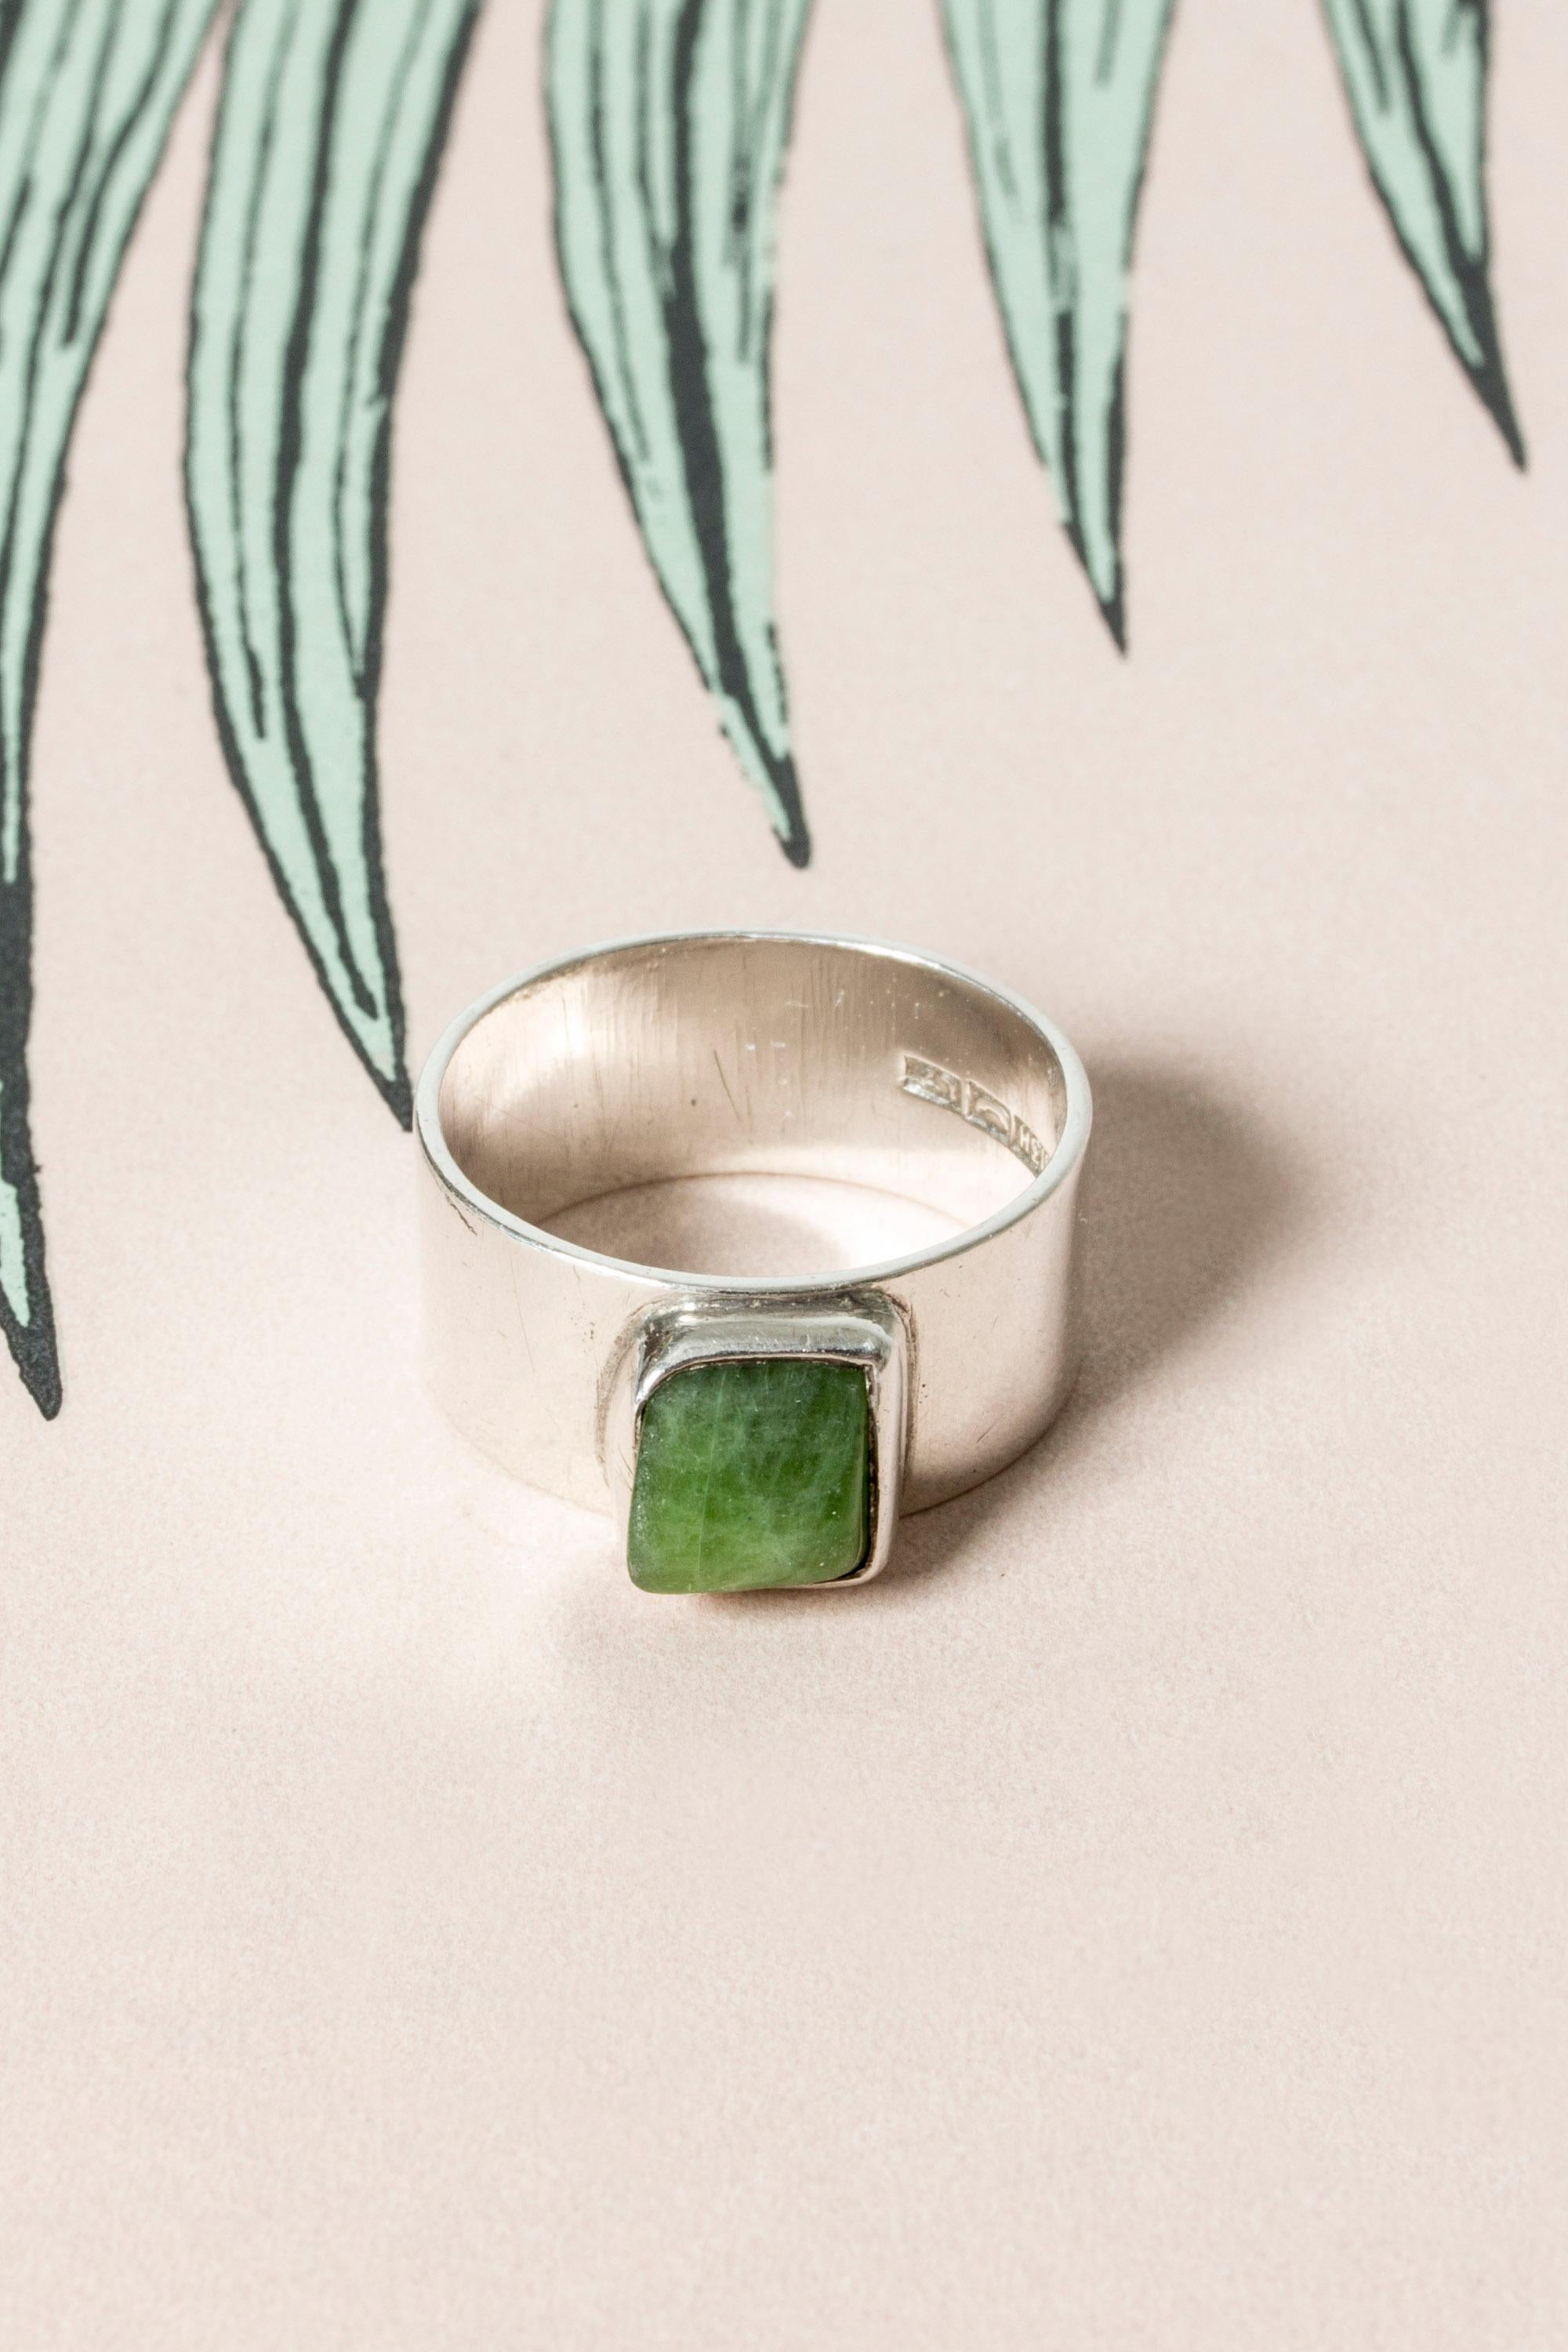 Cool Finnish modernist silver ring, with an organic shaped aventurine. Beautiful green color, a favorite ring to wear every day.